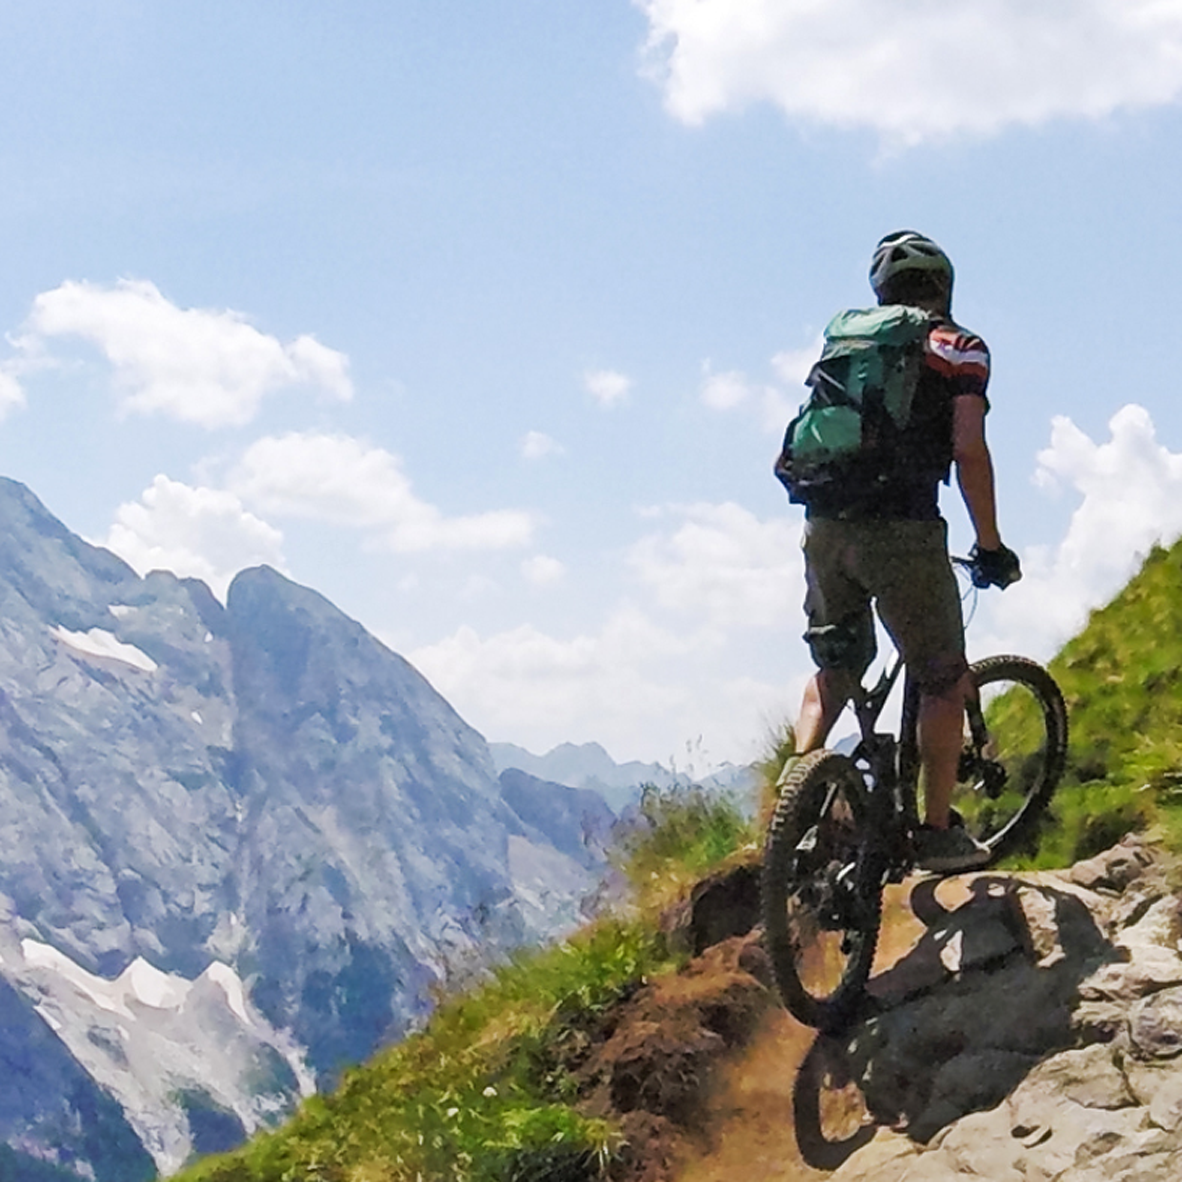 A person riding a mountain bike near the edge of a cliff, dramatic mountain view in the background